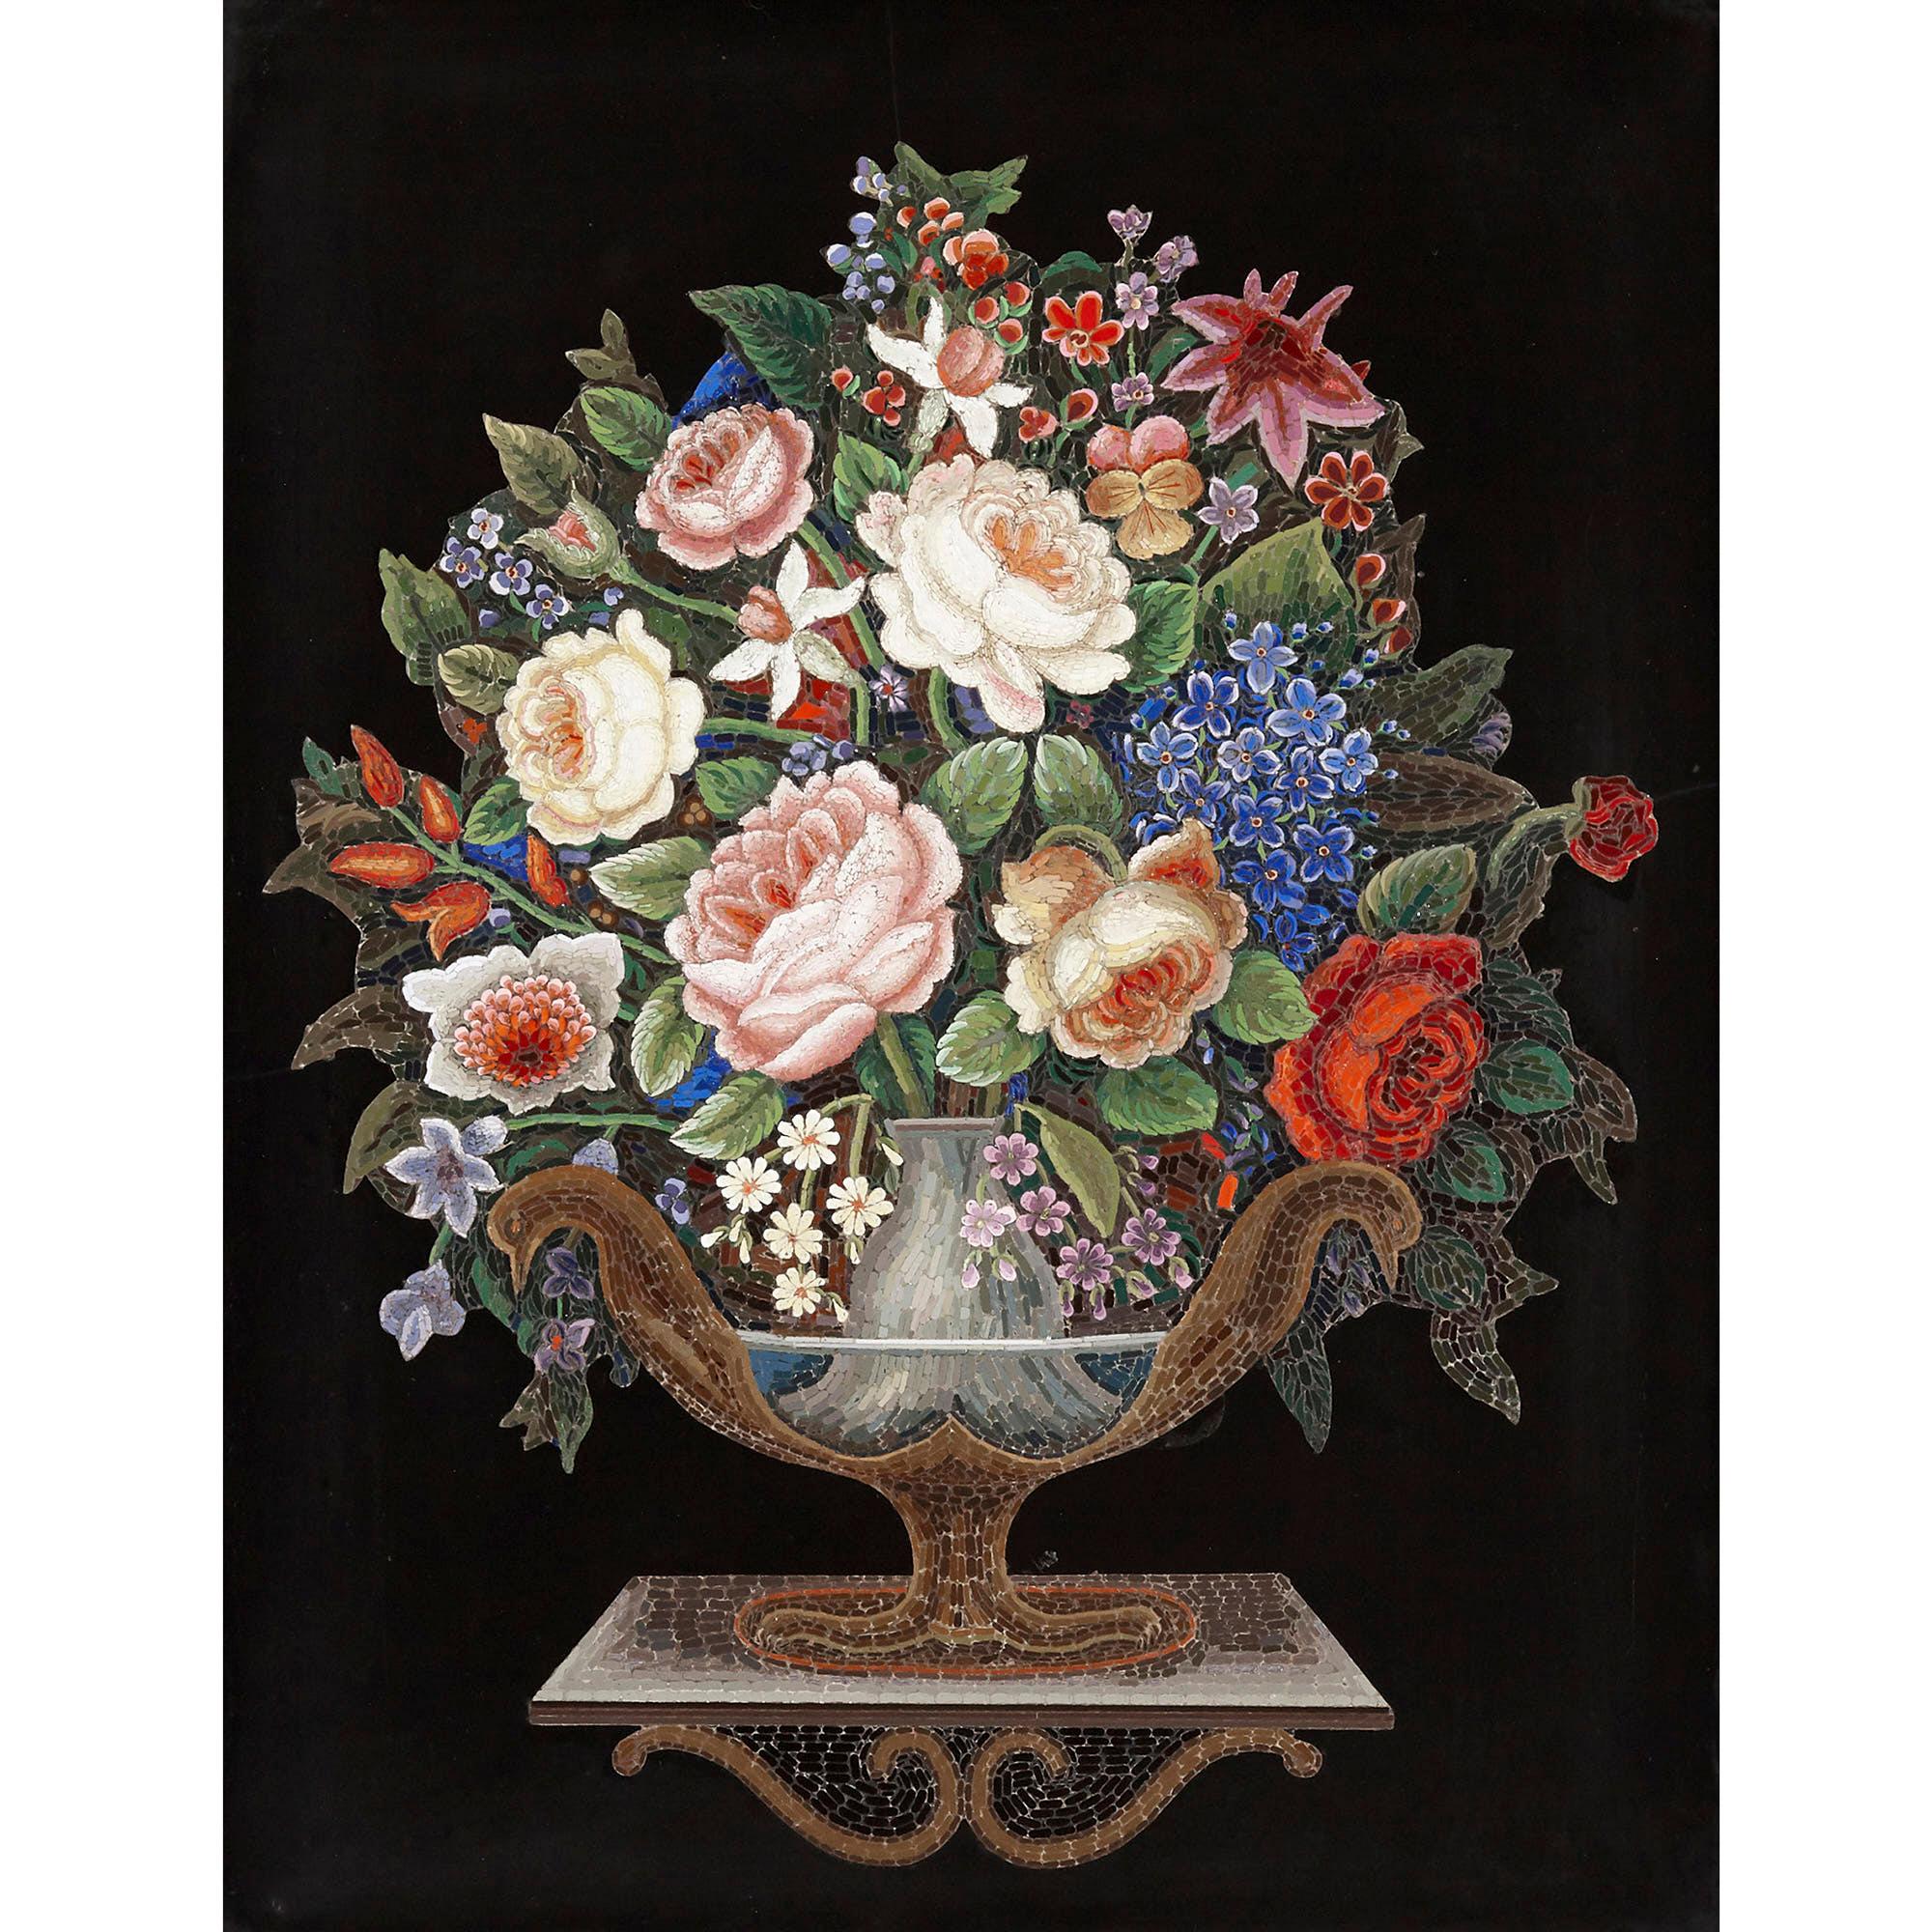 Large floral micro-mosaic by the Vatican Mosaic Studio
Italian, circa 1870
Measures: Frame: Height 56cm, width 47cm, depth 3.5cm
Plaque: Height 45cm, width 37cm, depth 0.5cm

This magnificent micro-mosaic depicts a bouquet of flowers in a